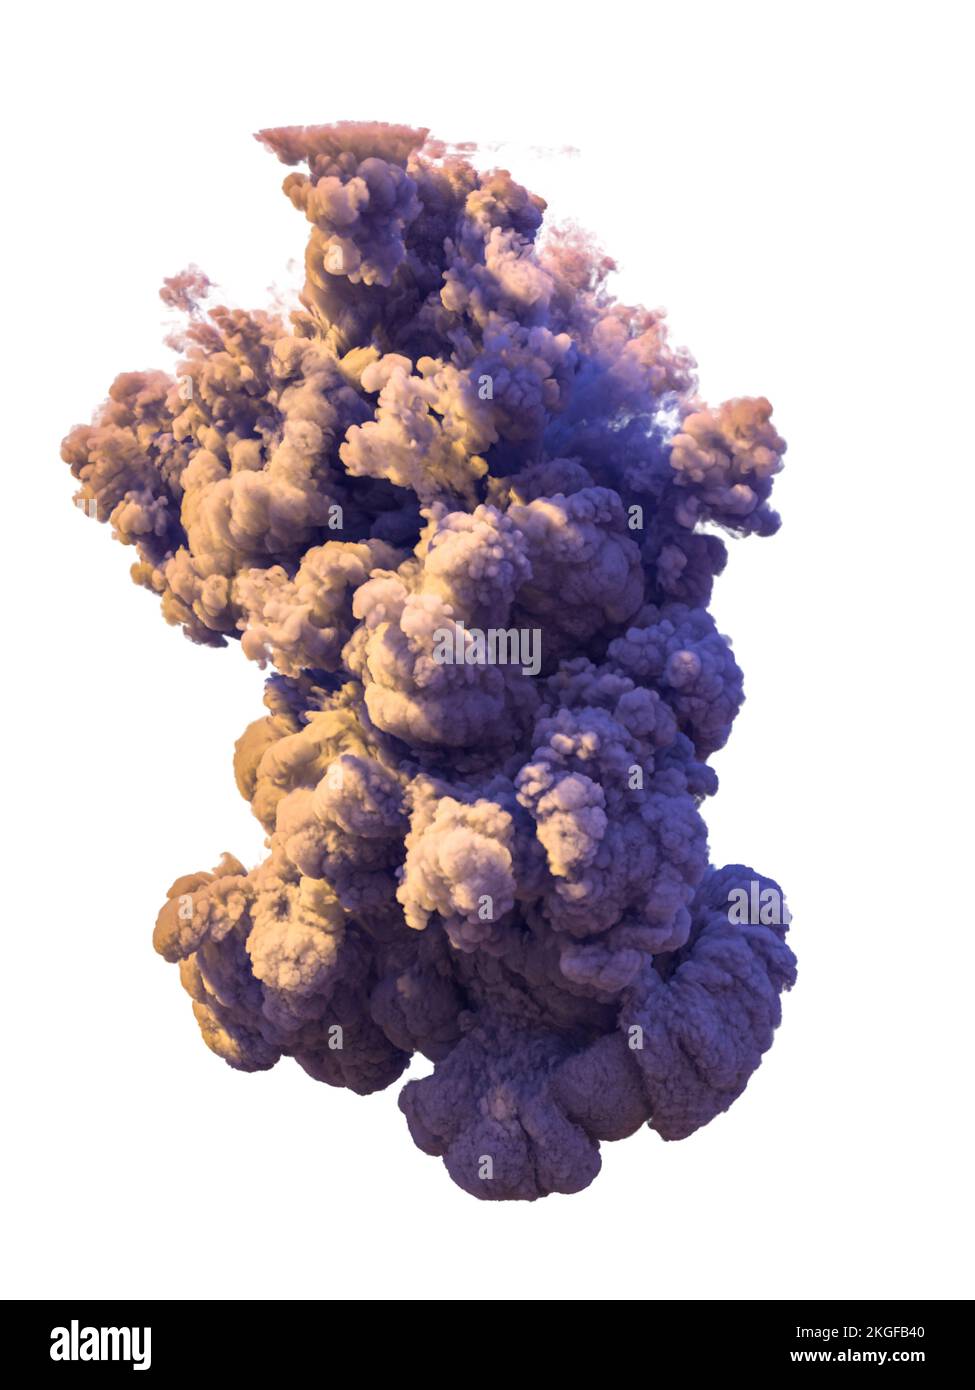 cloud of purple and pink smoke isolated Stock Photo